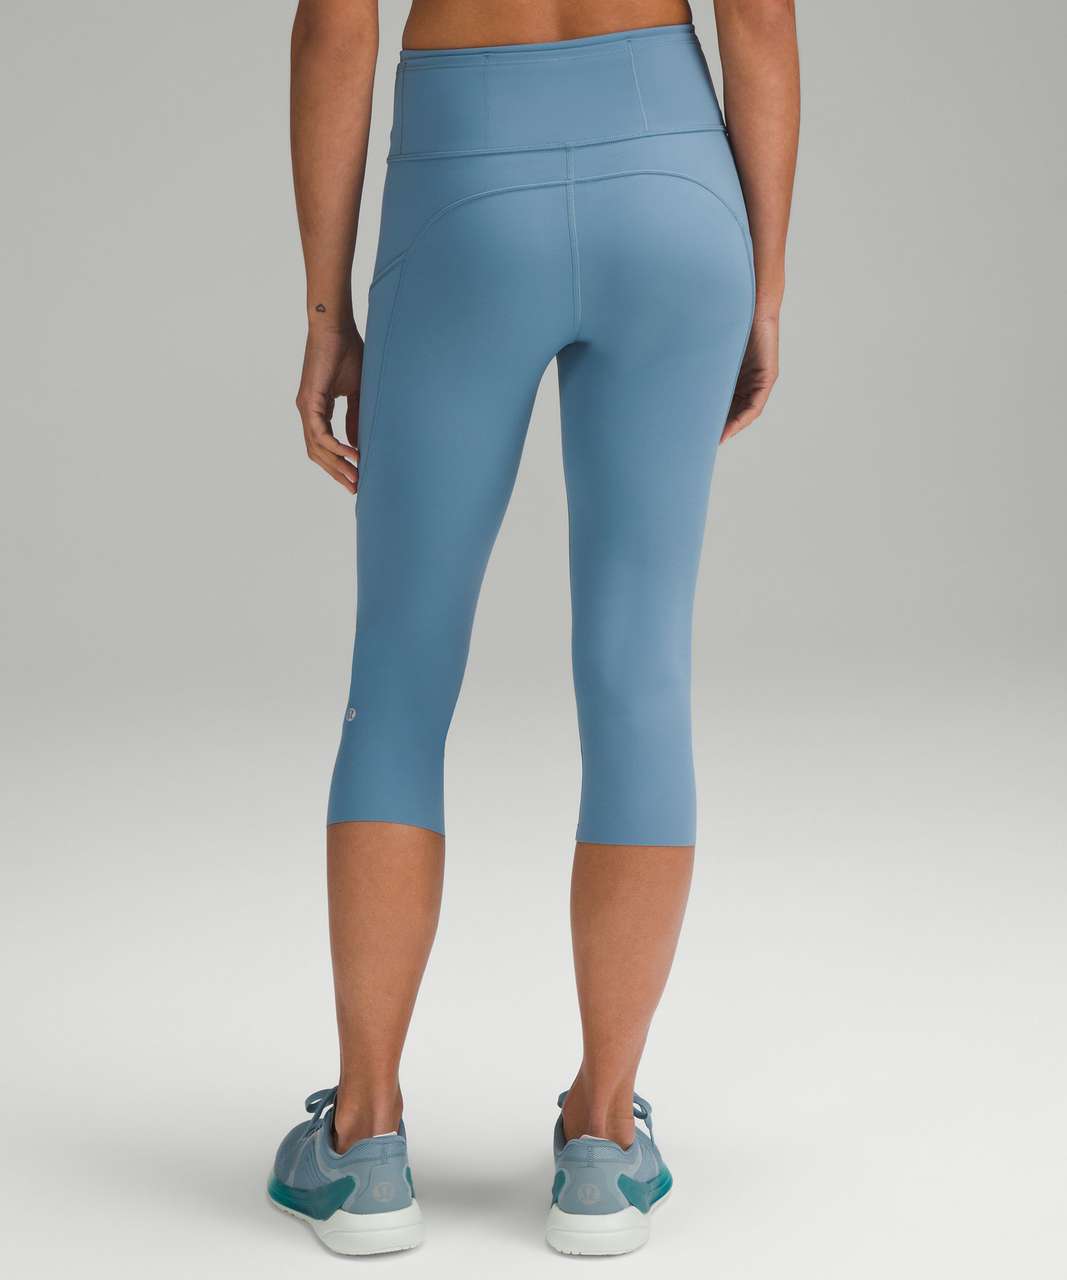 Lululemon Fast and Free Reflective High-Rise Crop 19" - Utility Blue